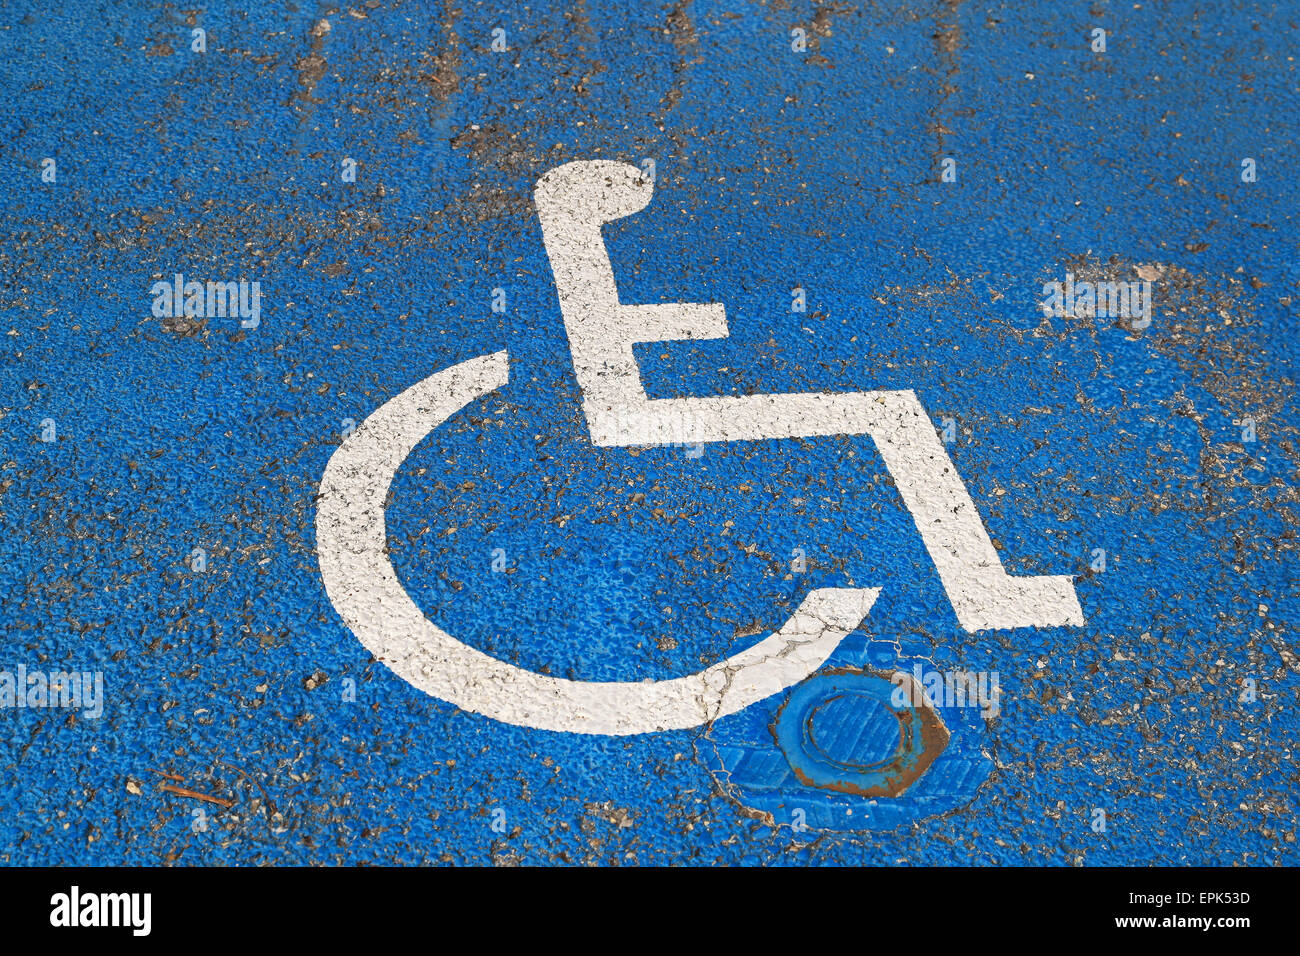 Handicapped sign Stock Photo